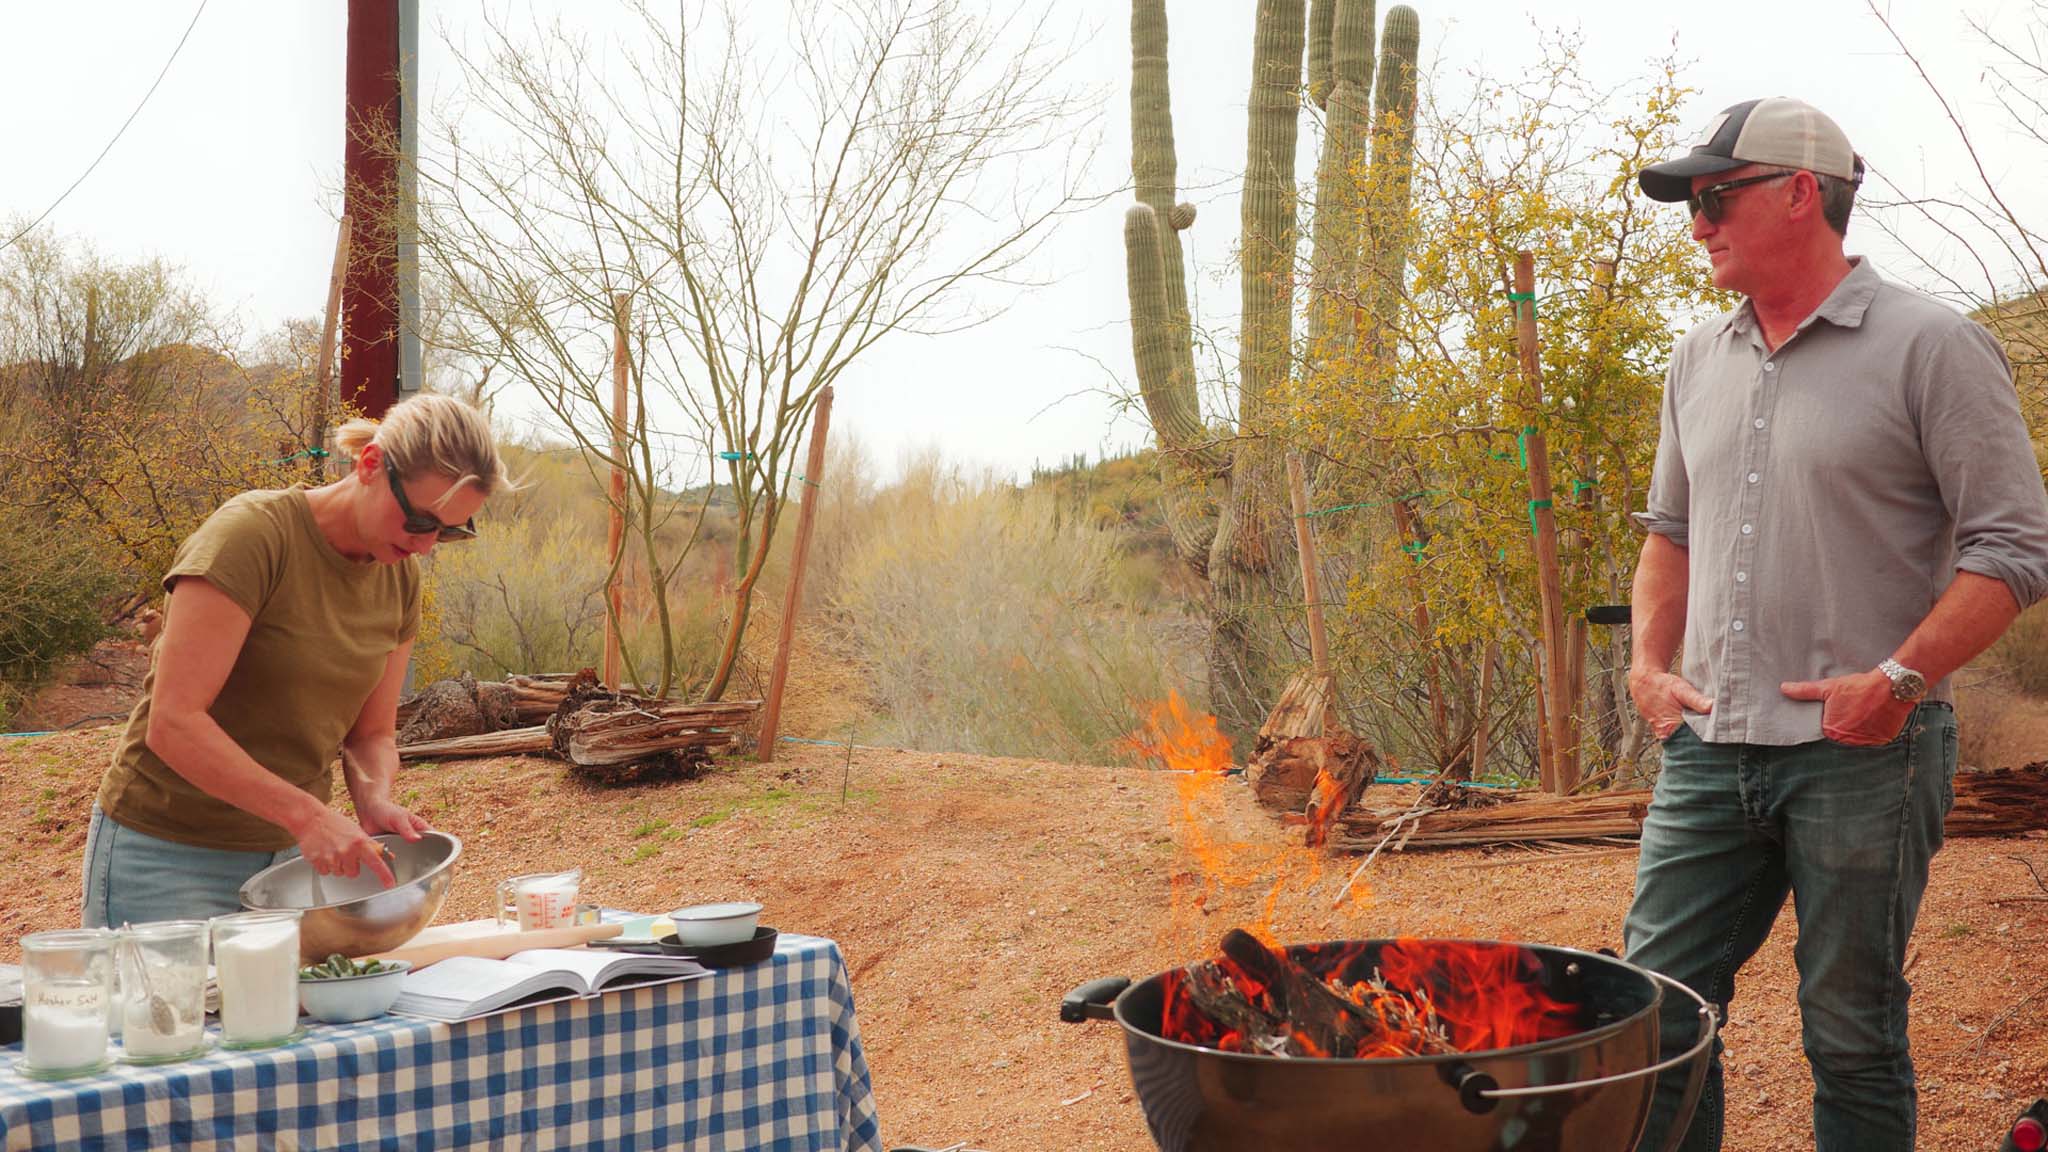 Erin and Michael prepare food while in Arizona as seen on Getting Lost, episode 103